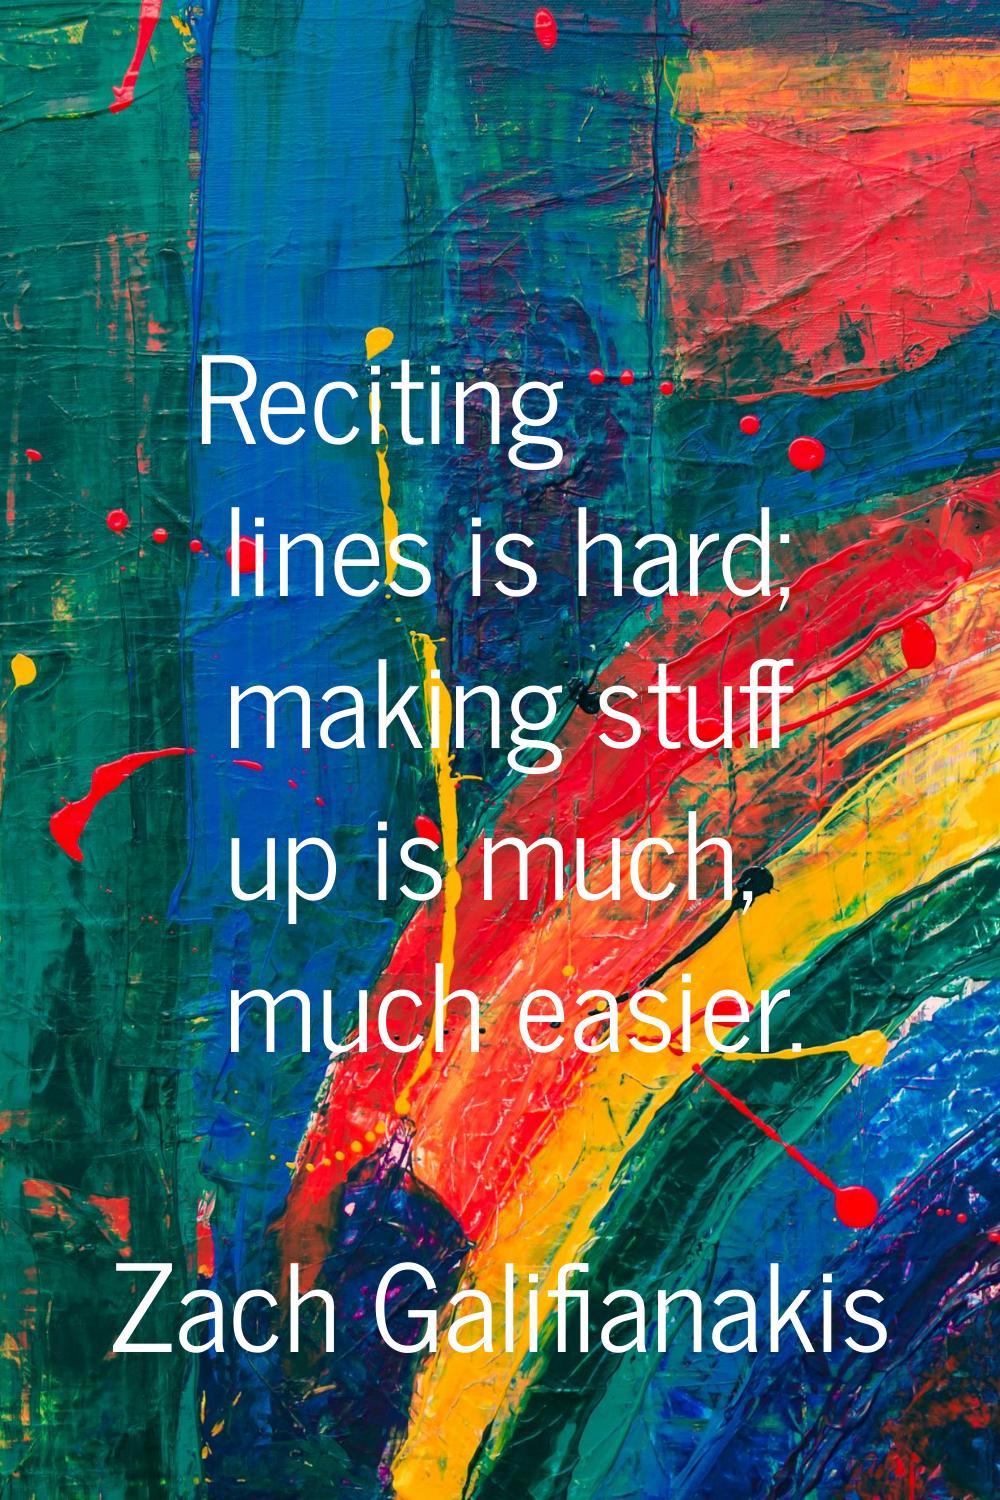 Reciting lines is hard; making stuff up is much, much easier.